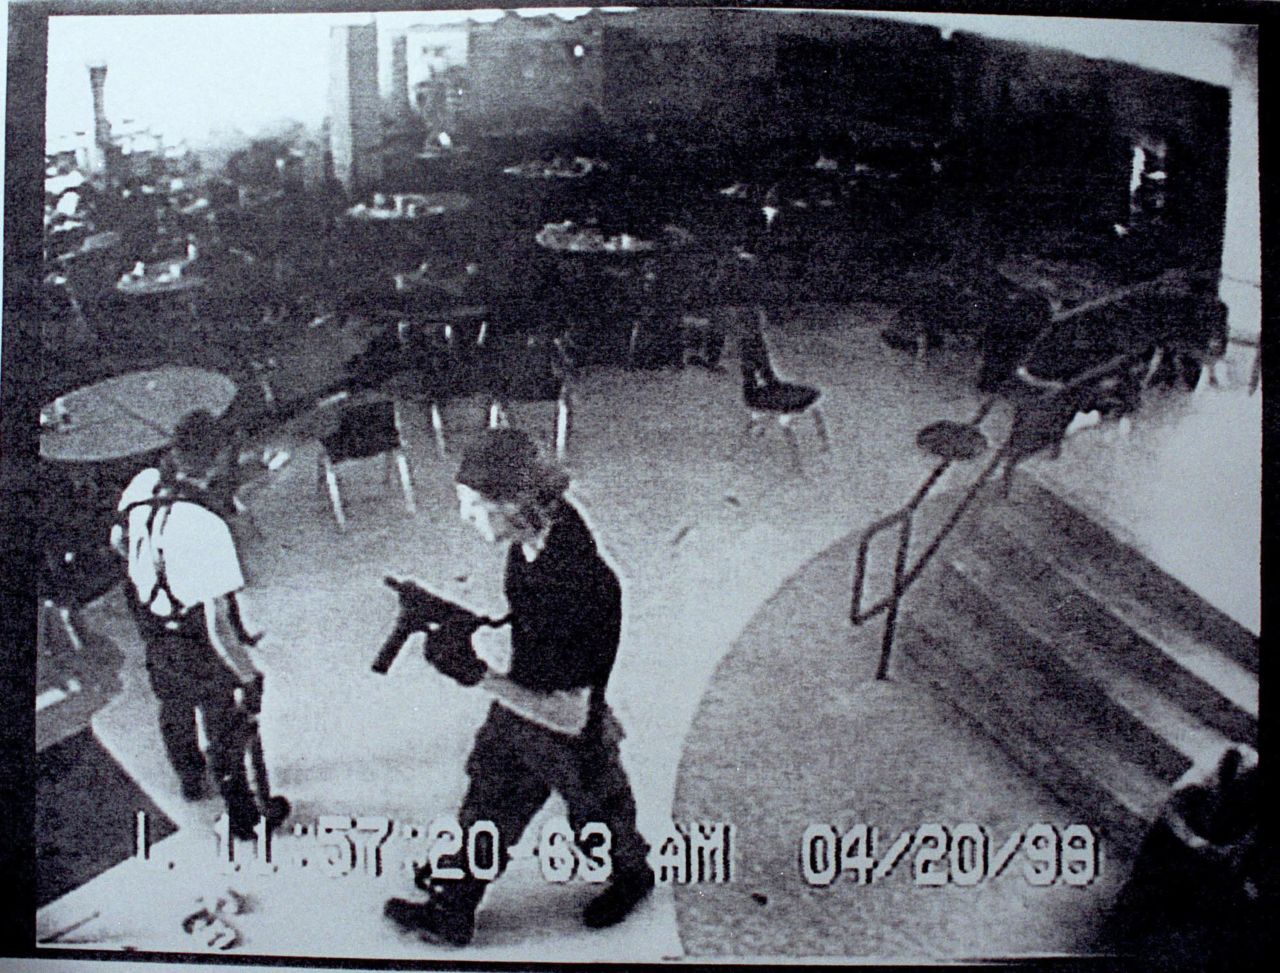 Eric Harris, left, and Dylan Klebold brought guns and bombs to <a href="http://www.cnn.com/US/9904/20/school.shooting.03/index.html?iref=allsearch" target="_blank">Columbine High School</a> in Littleton, Colorado, in April 1999. The students gunned down 13 and wounded 23 before killing themselves.